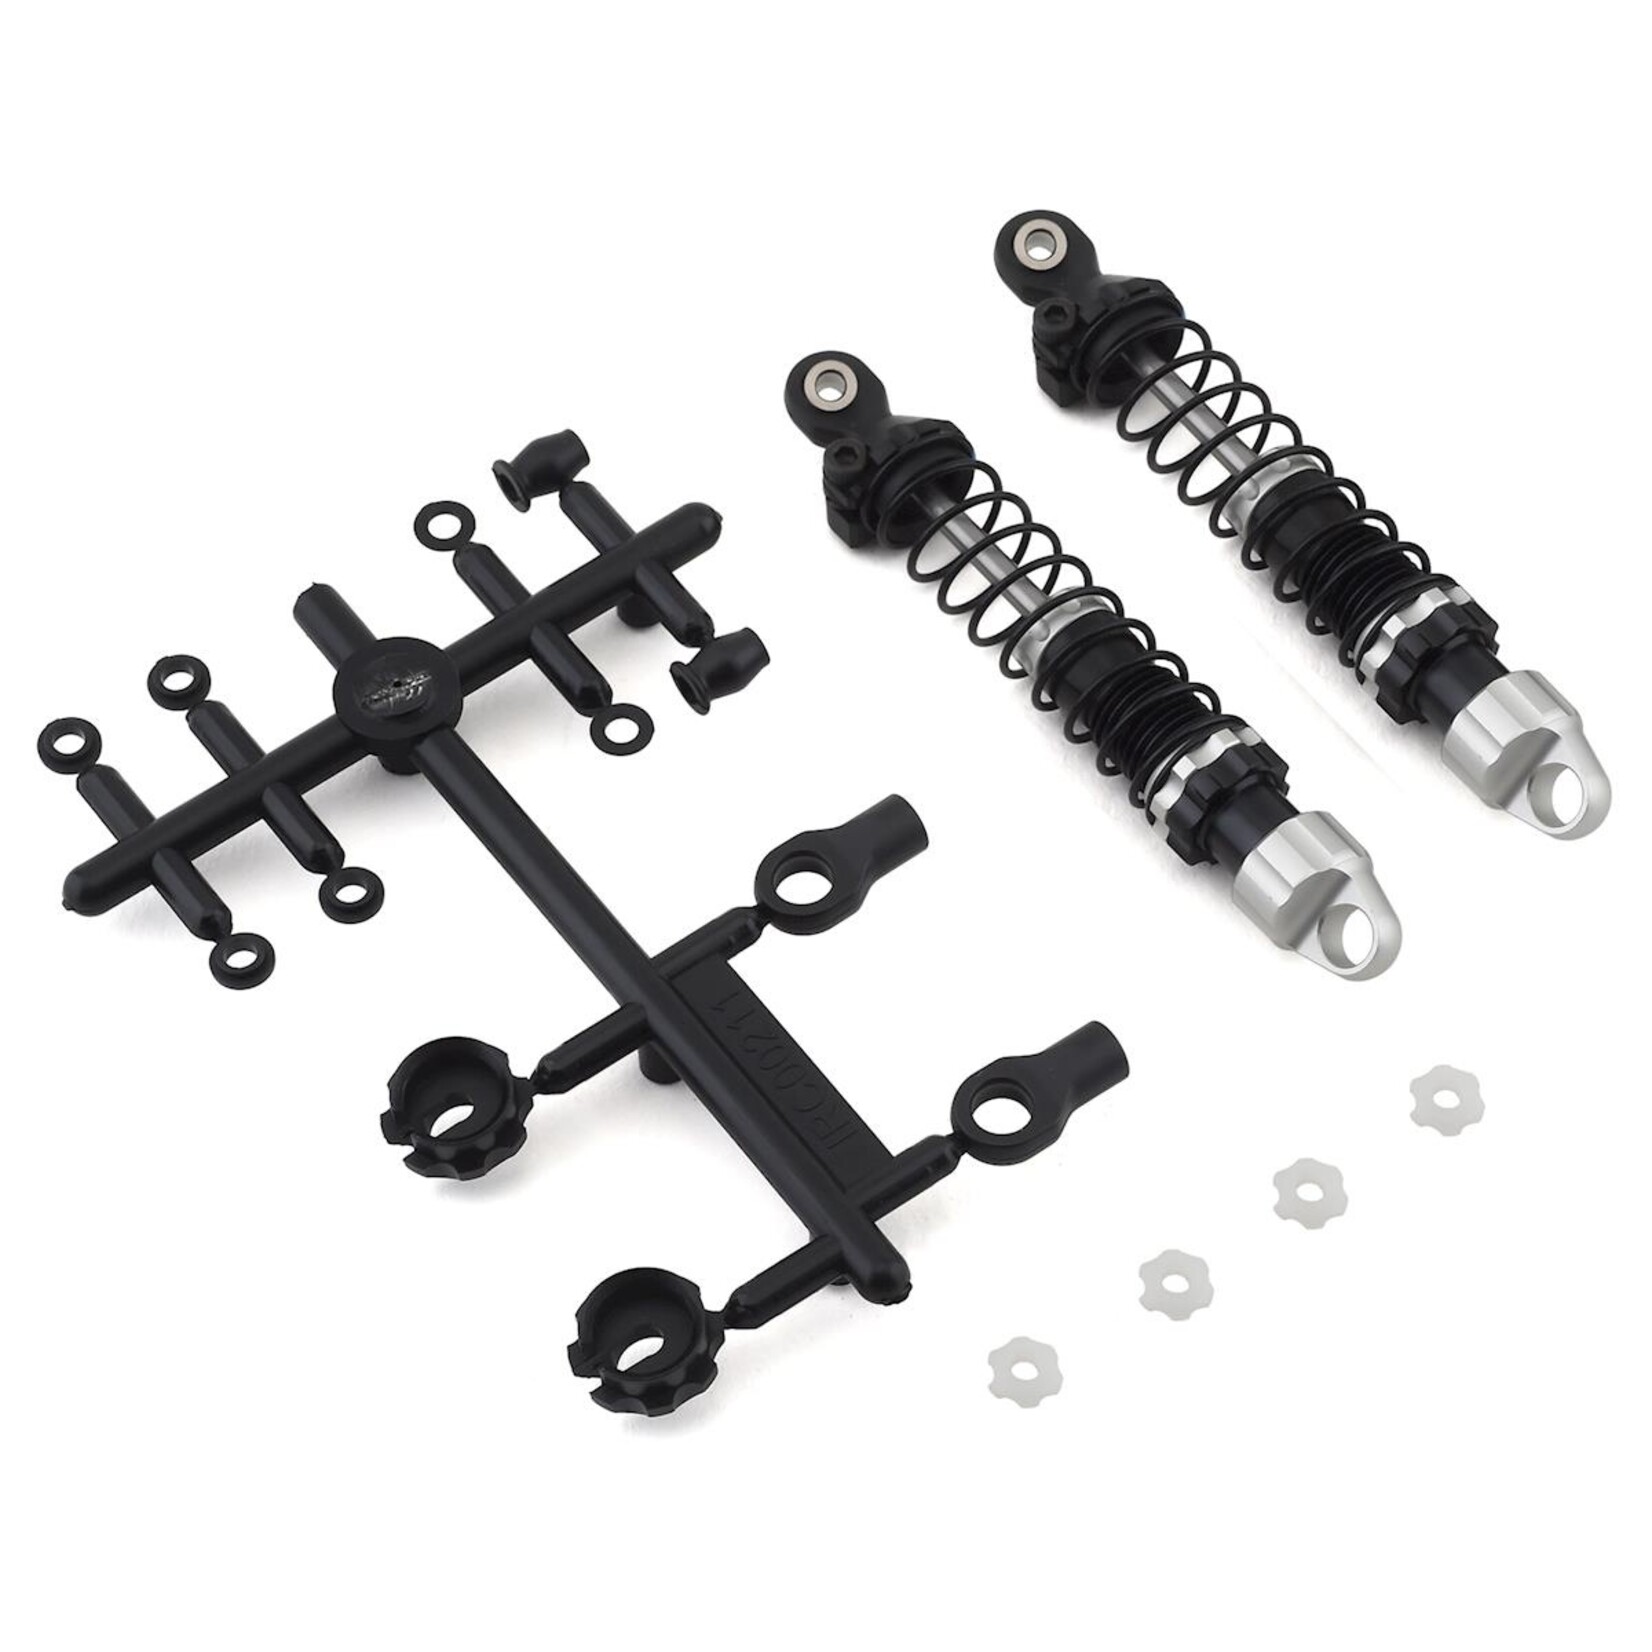 Incision Incision 80mm Scale Shock Set (2) #IRC00215